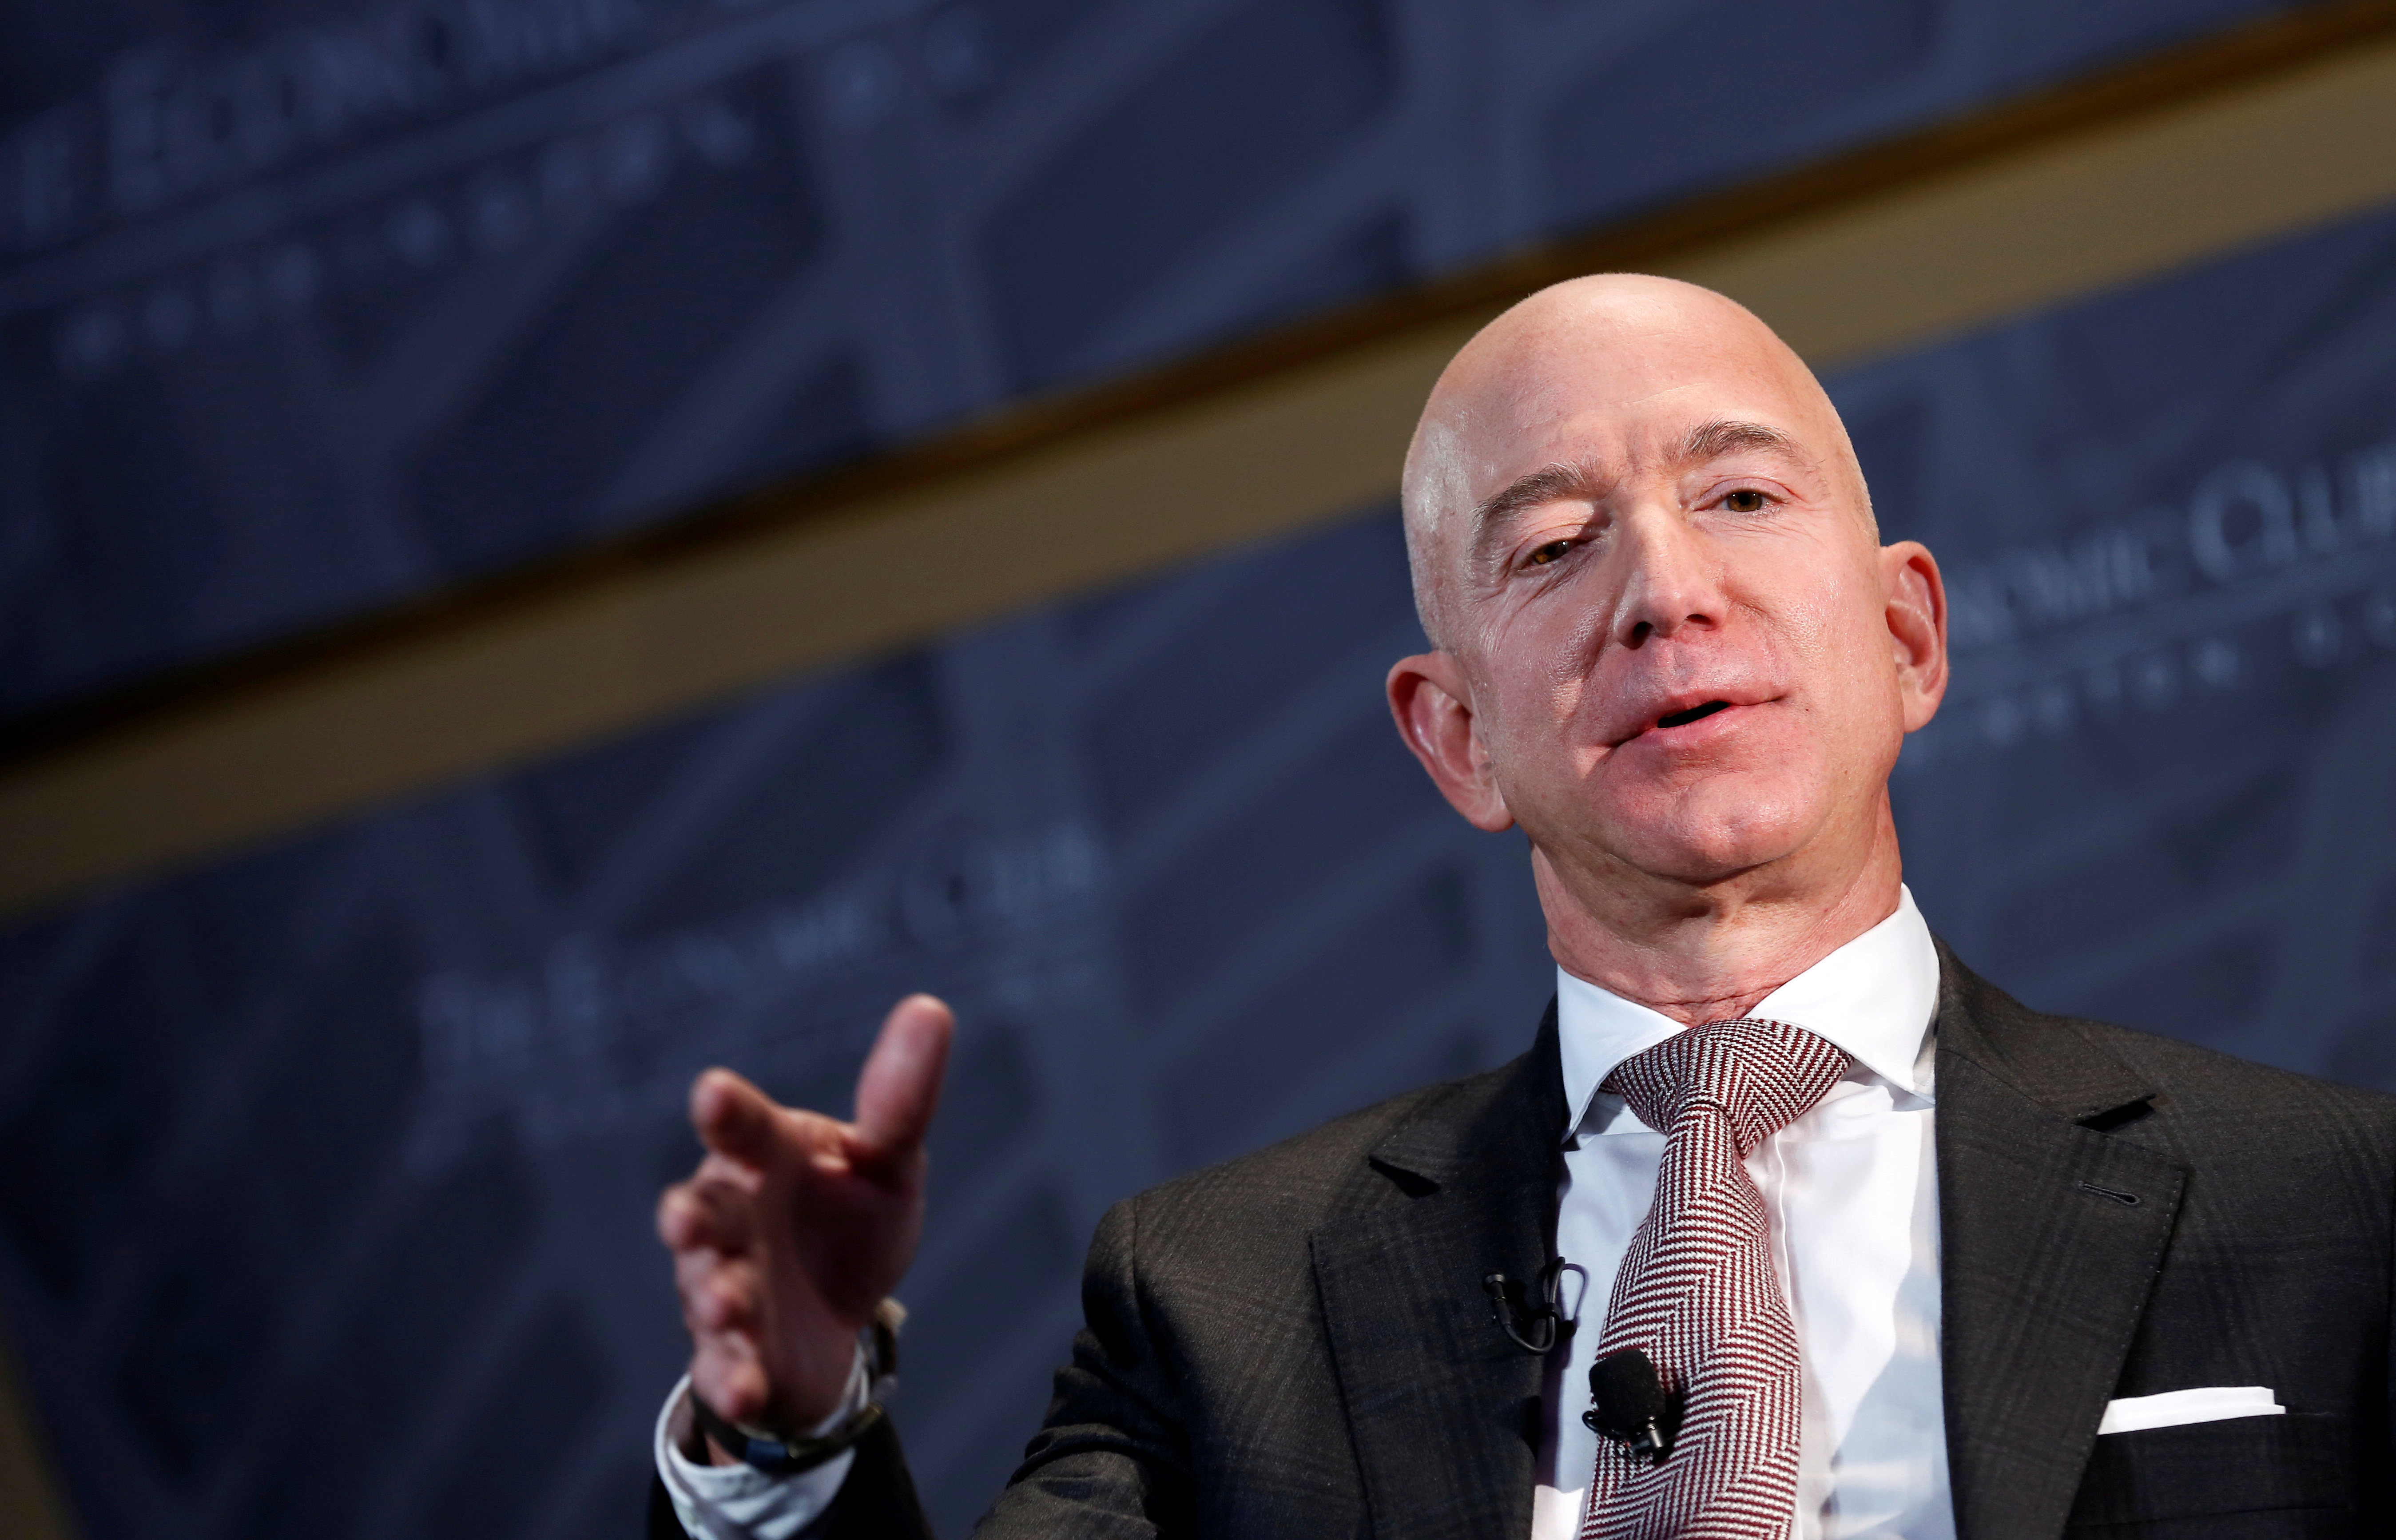 Jeff Bezos, President and CEO of Amazon and owner of The Washington Post, speaks at the Washington DC Economic Club 